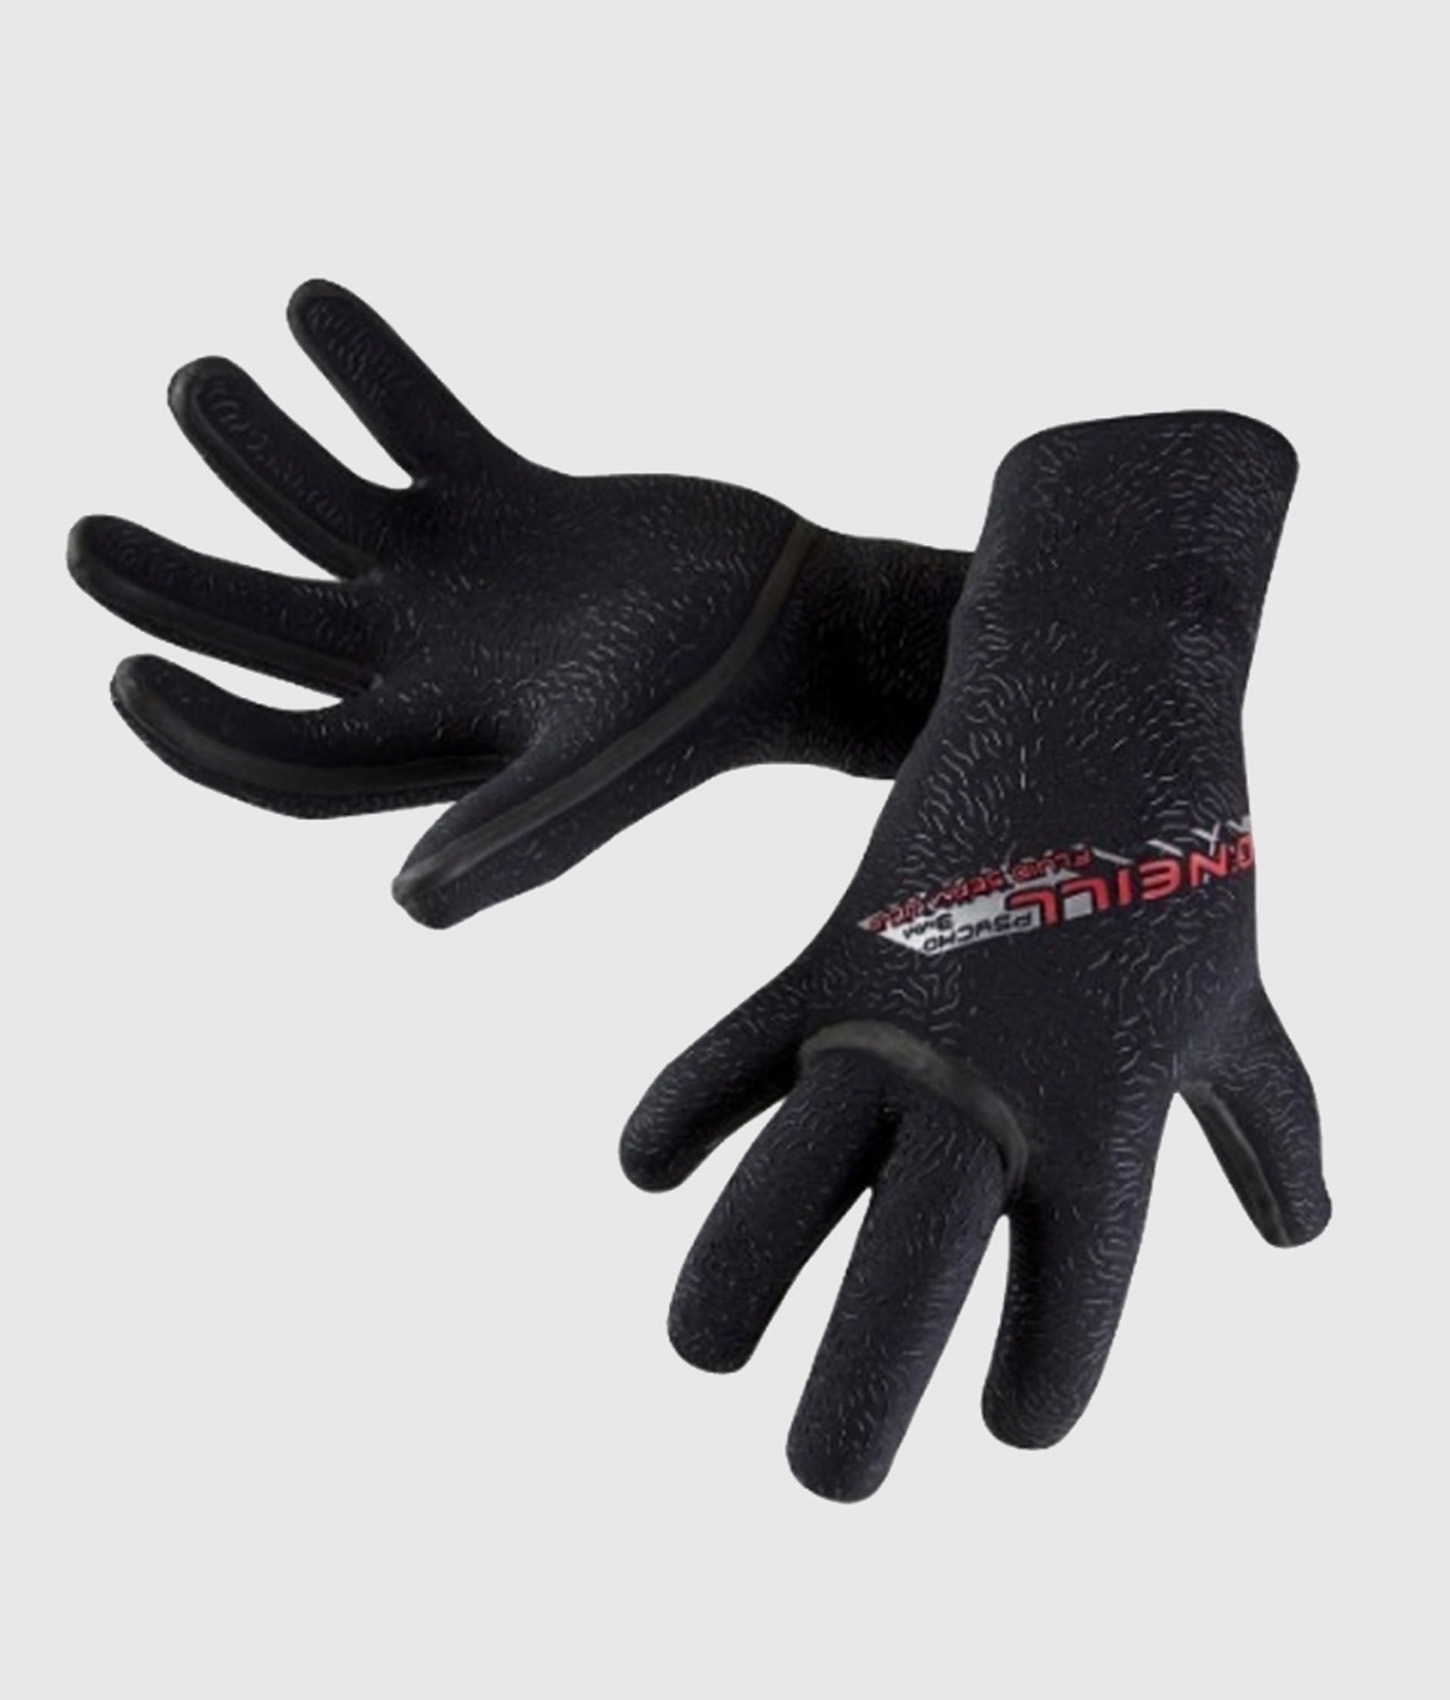 3MM Psycho Glove Double Lined